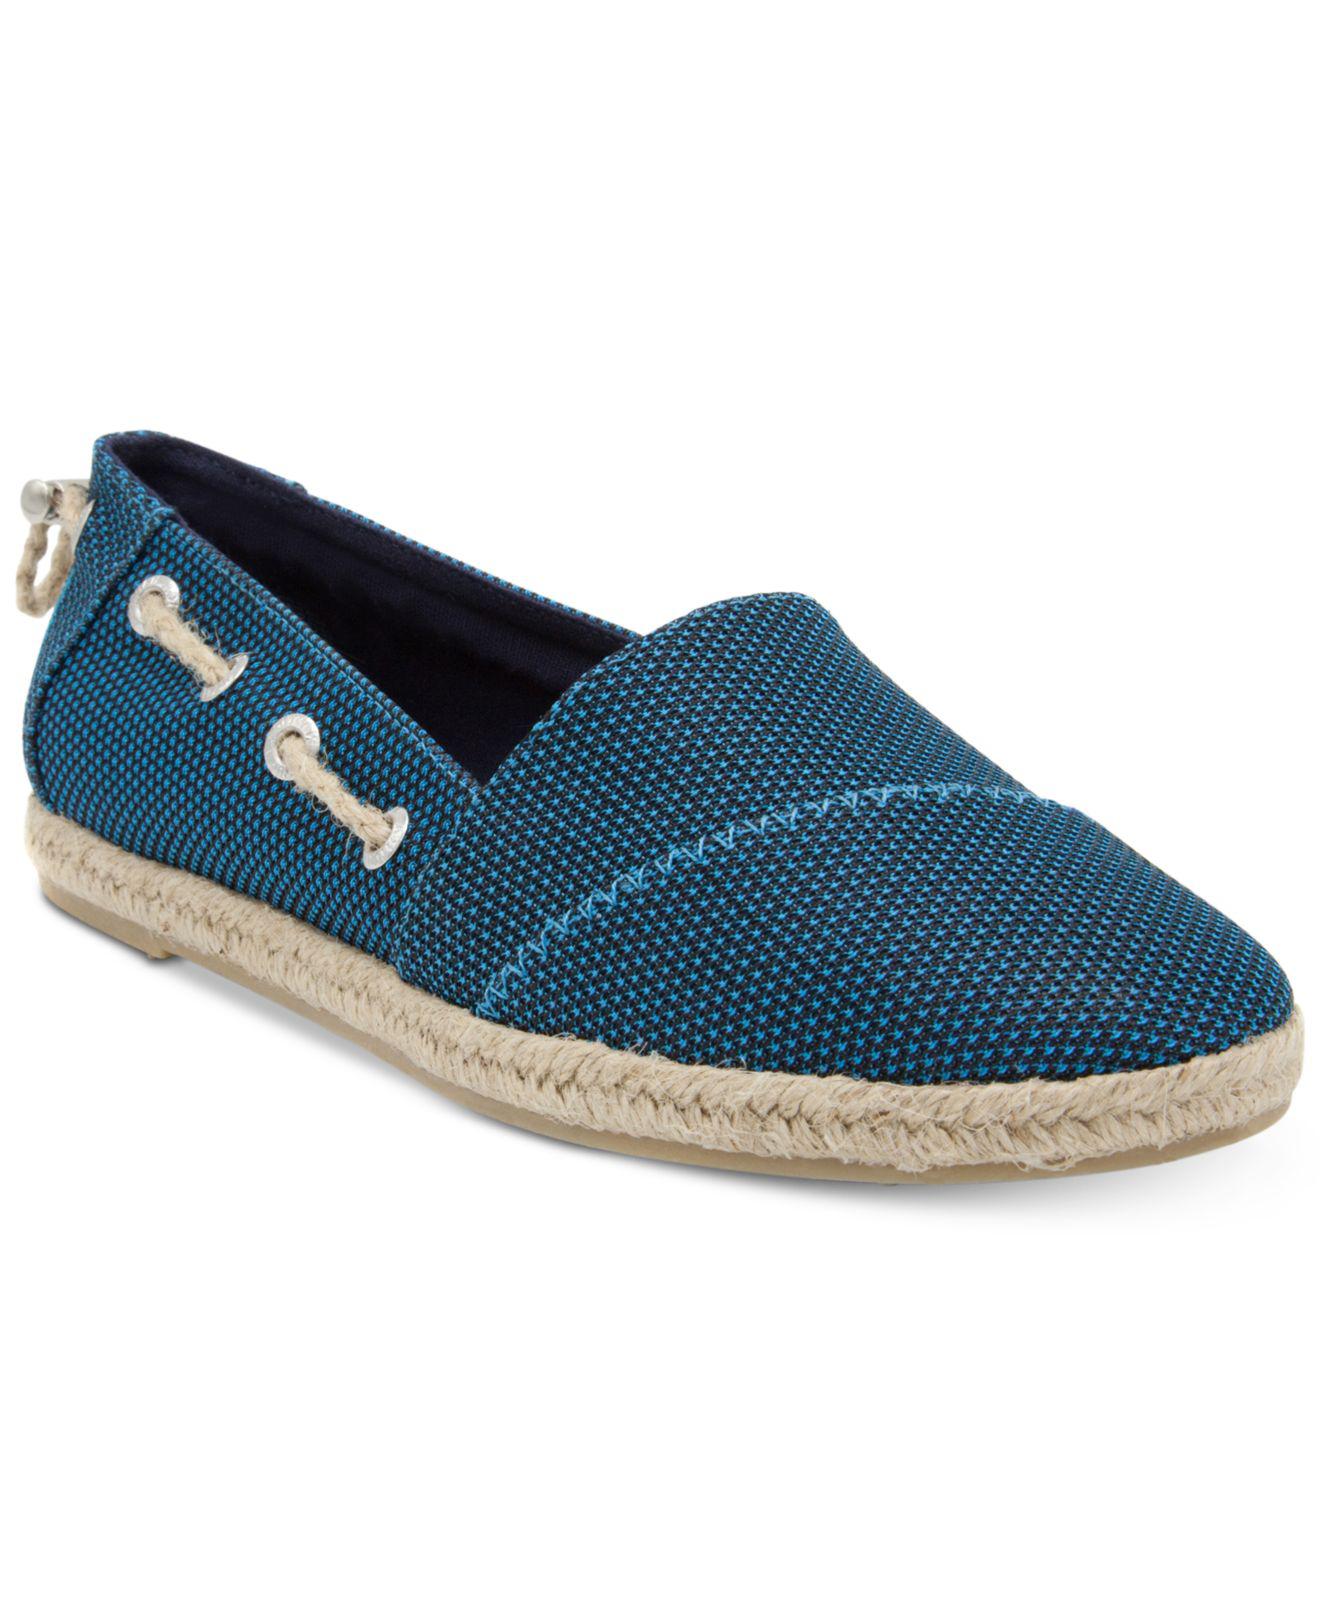 Nautica Synthetic Rudder Espadrille Flats in Blue - Lyst